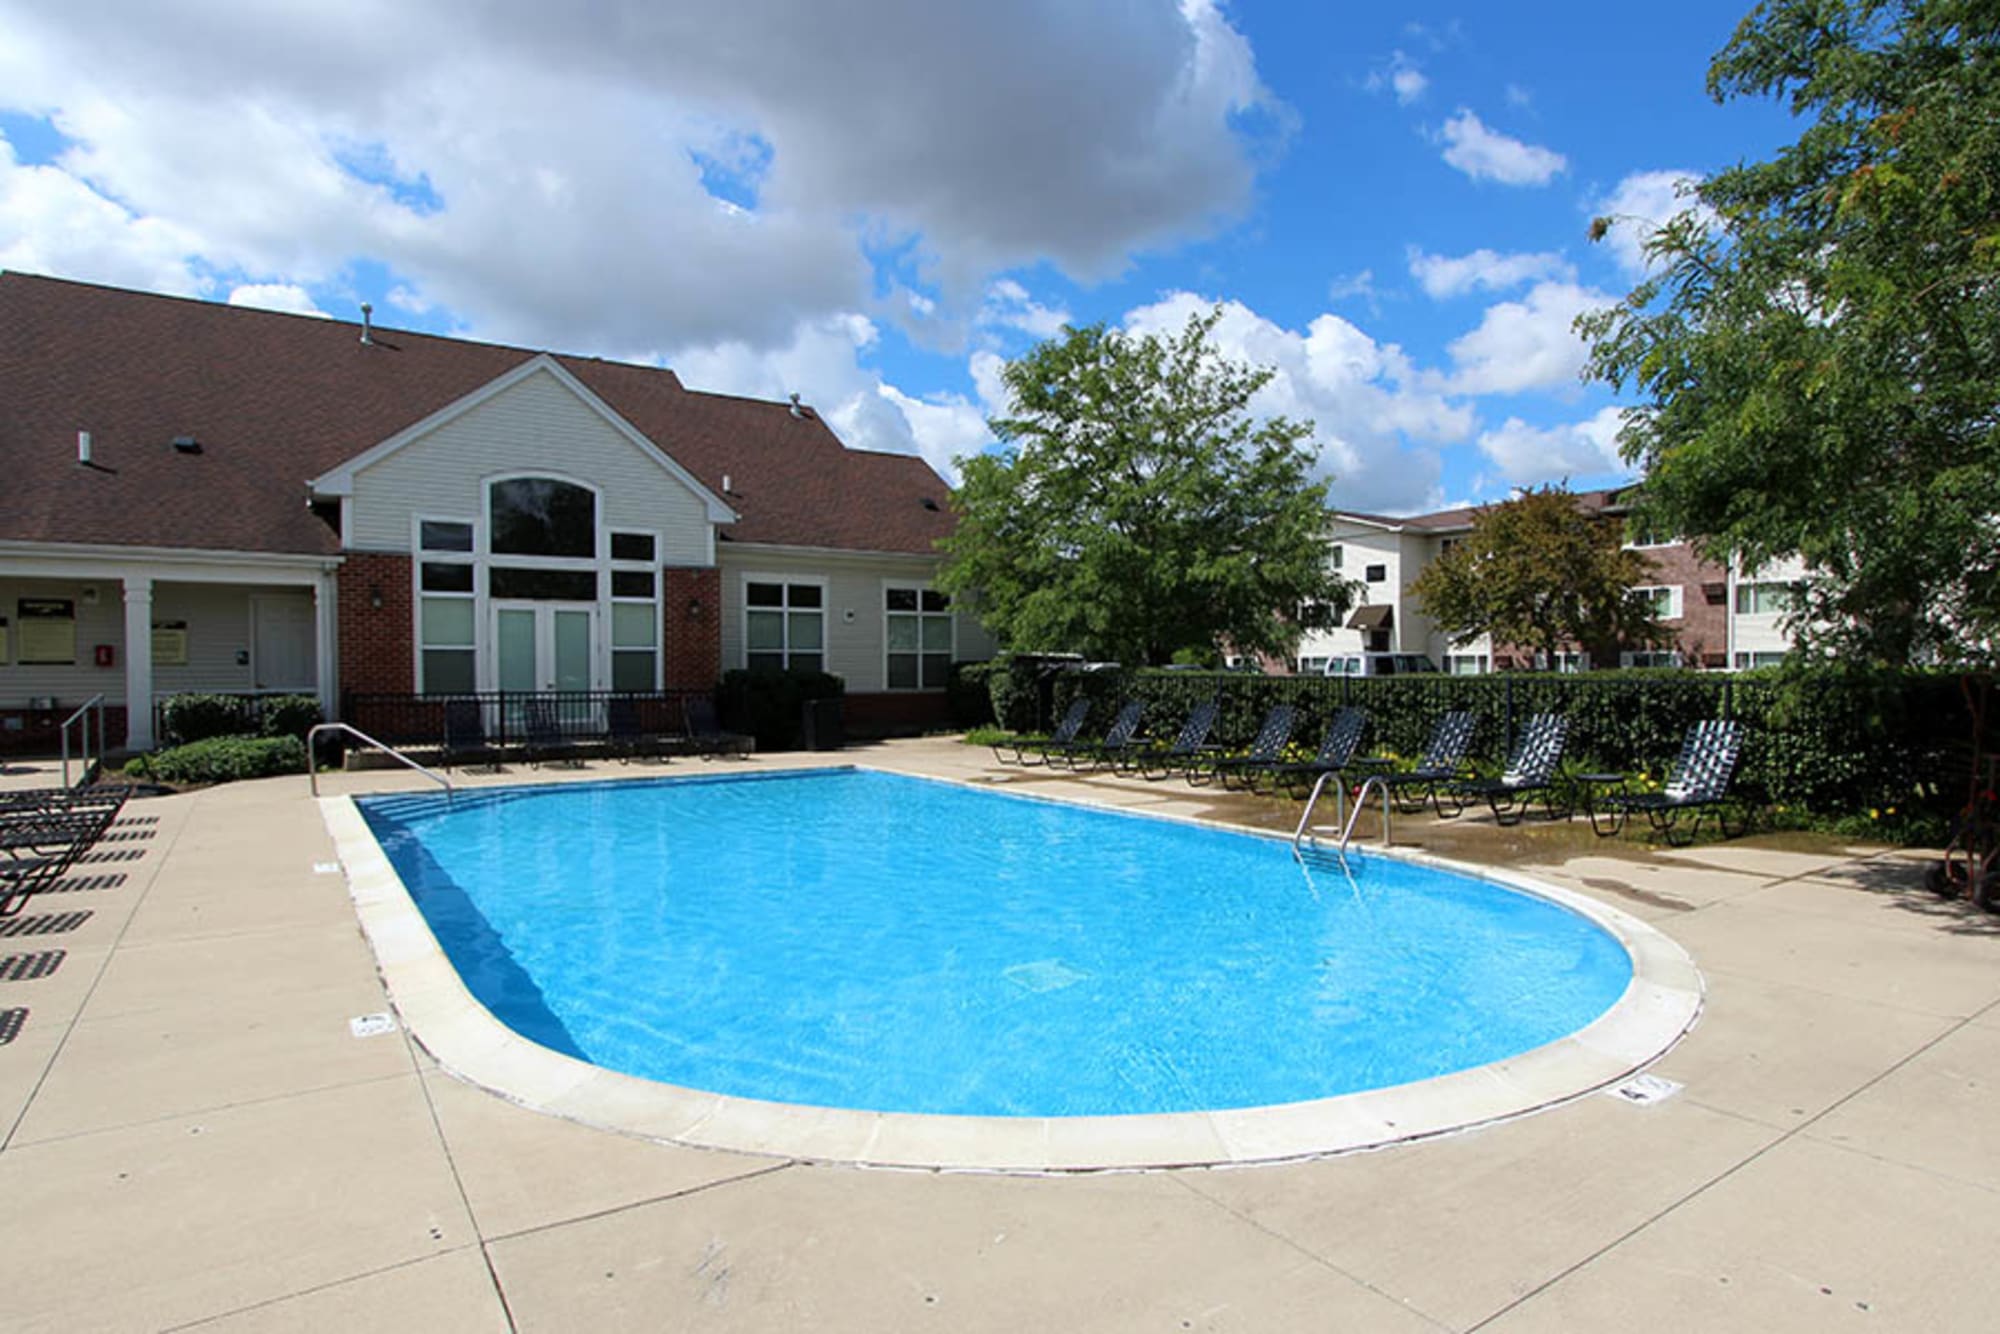 The swimming pool on a sunny day at Riverstone Apartments in Bolingbrook, Illinois